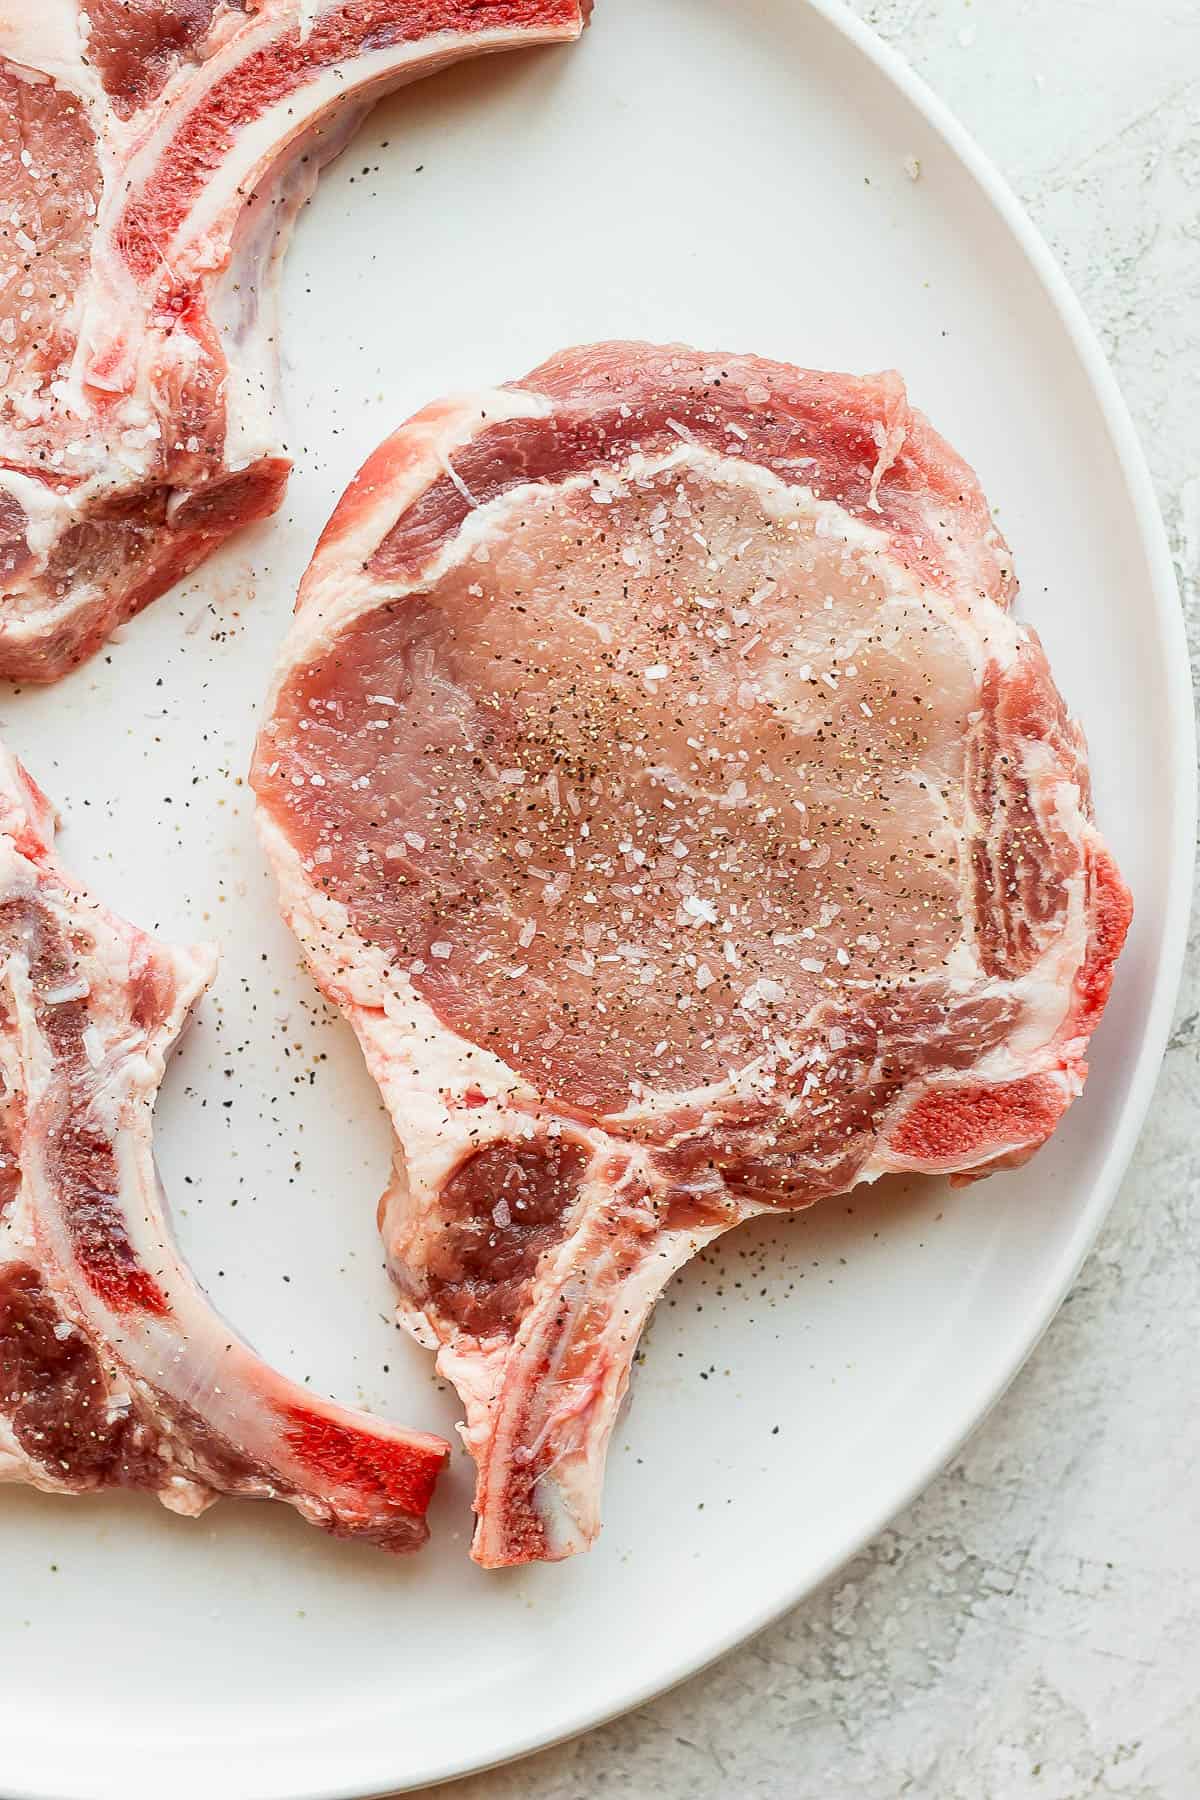 Raw pork chops on a plate with salt and pepper sprinkled on top.